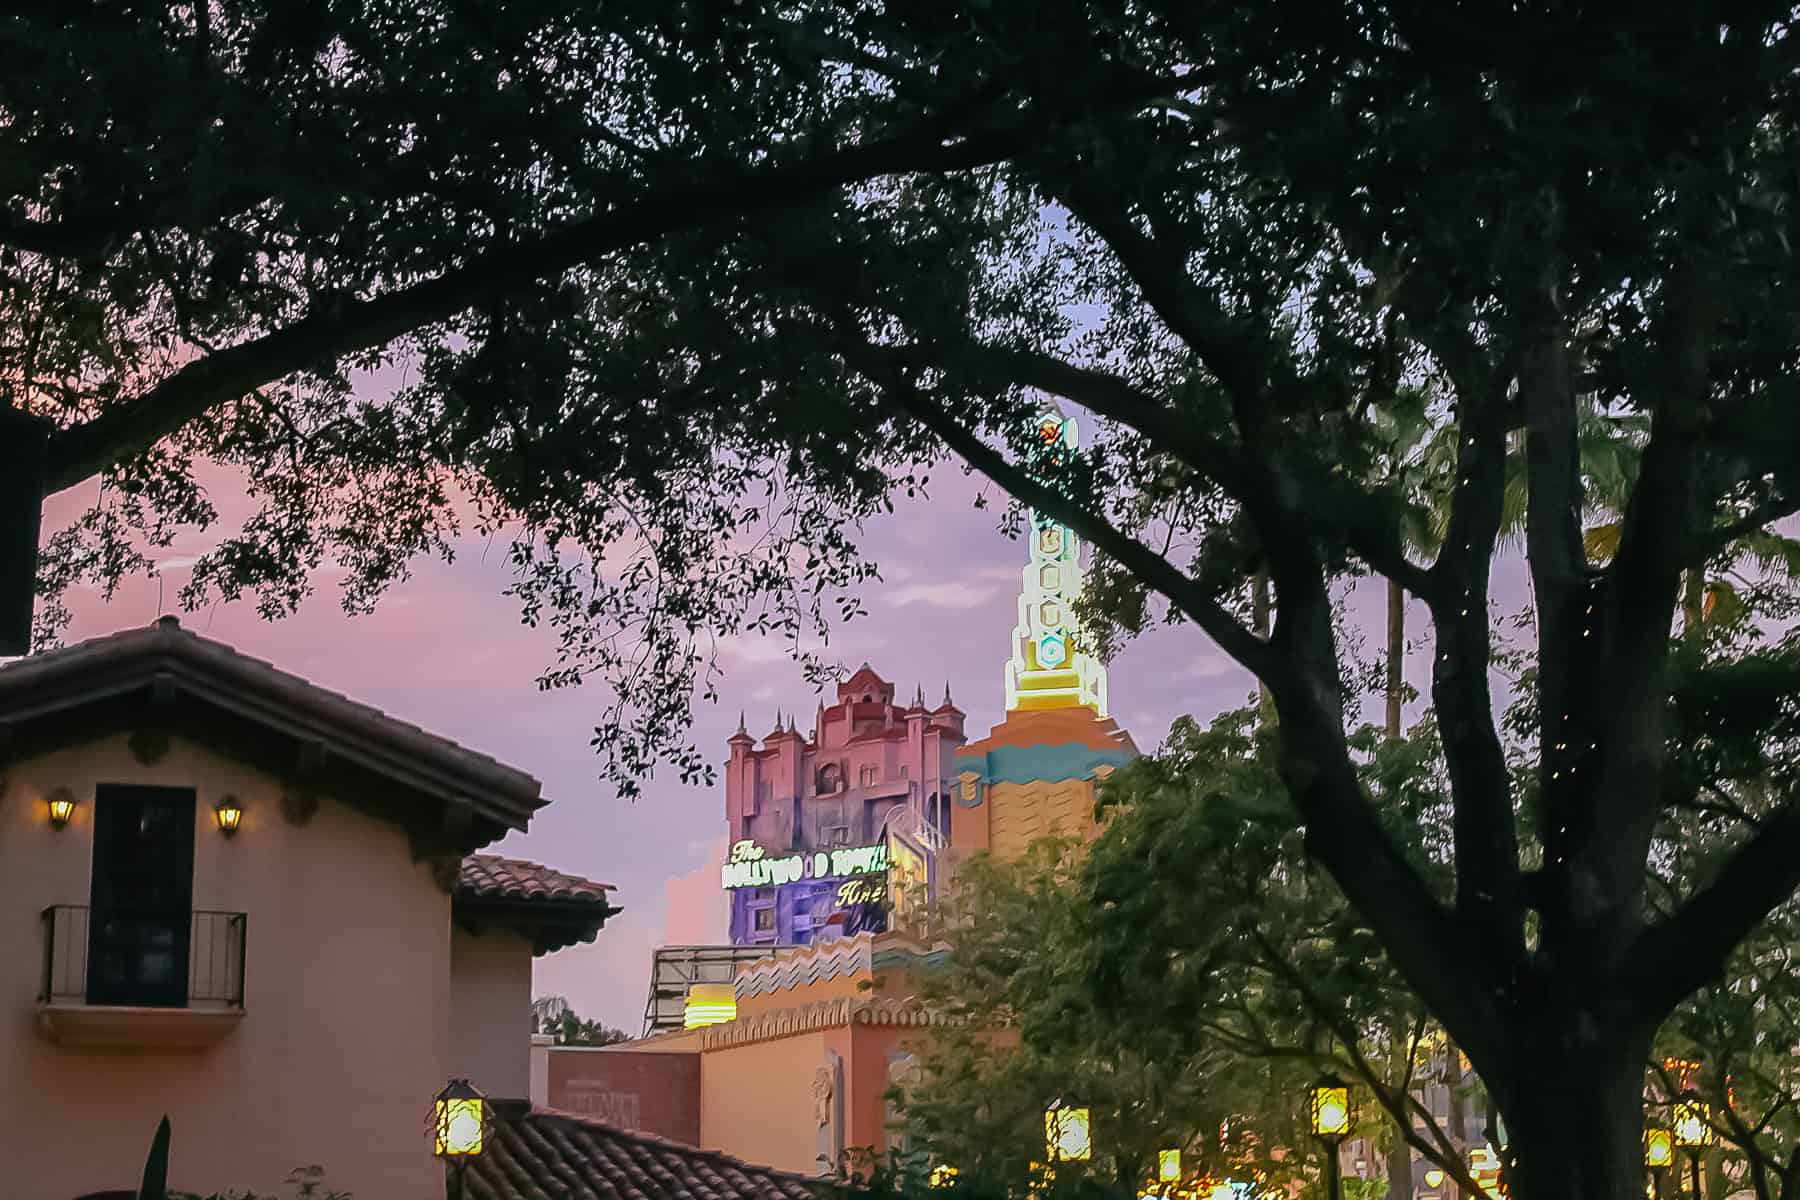 The Hollywood Tower Hotel at sunset 